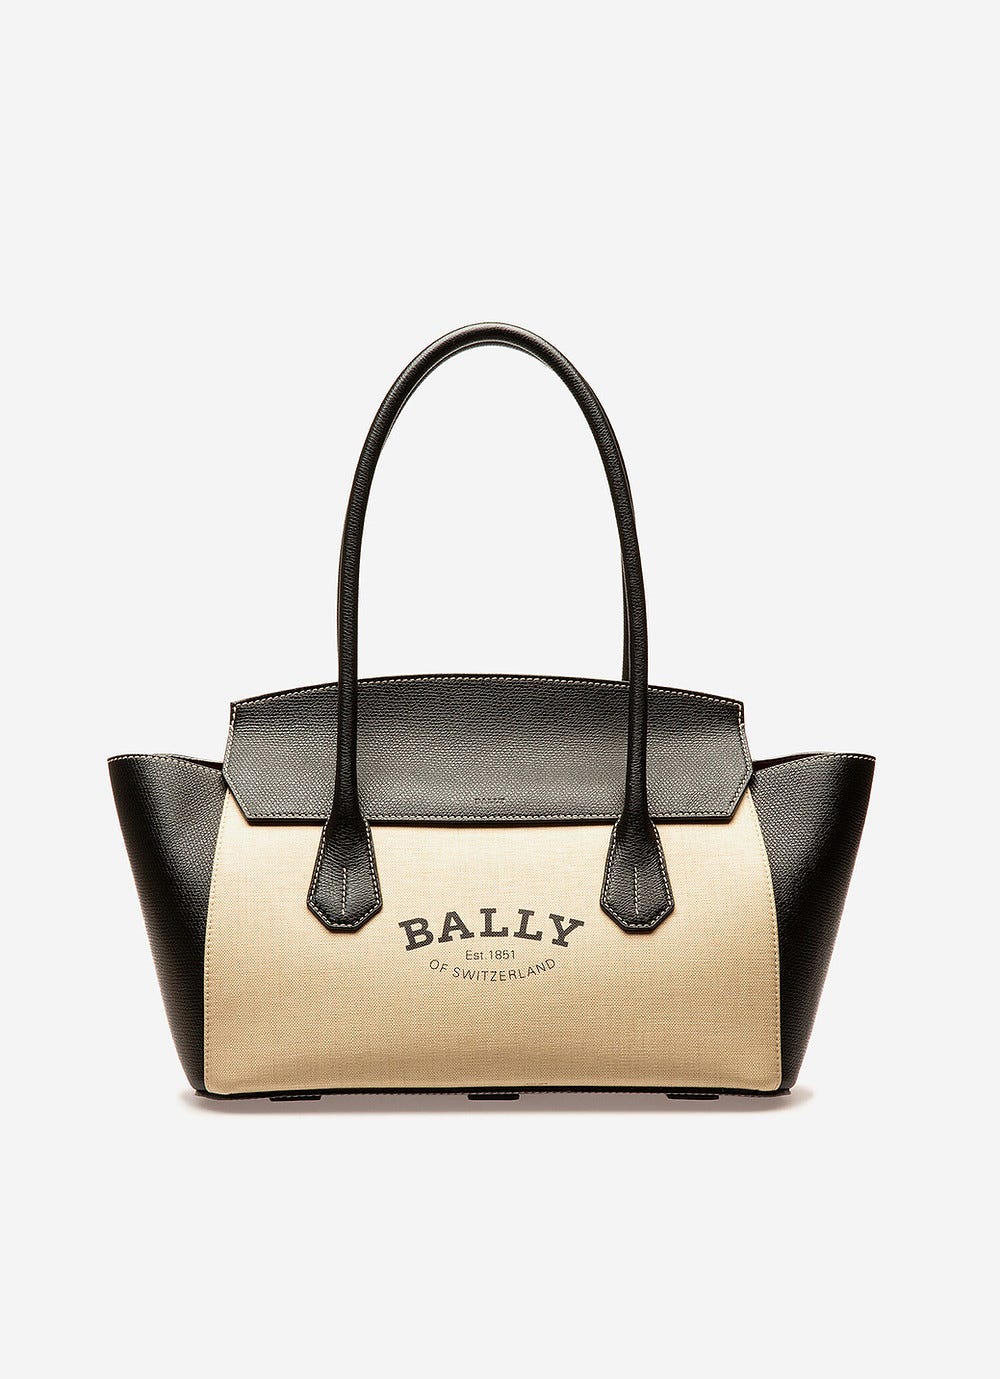 4 Reasons You Should Buy Bally Bags | by I LUVE IT | Medium